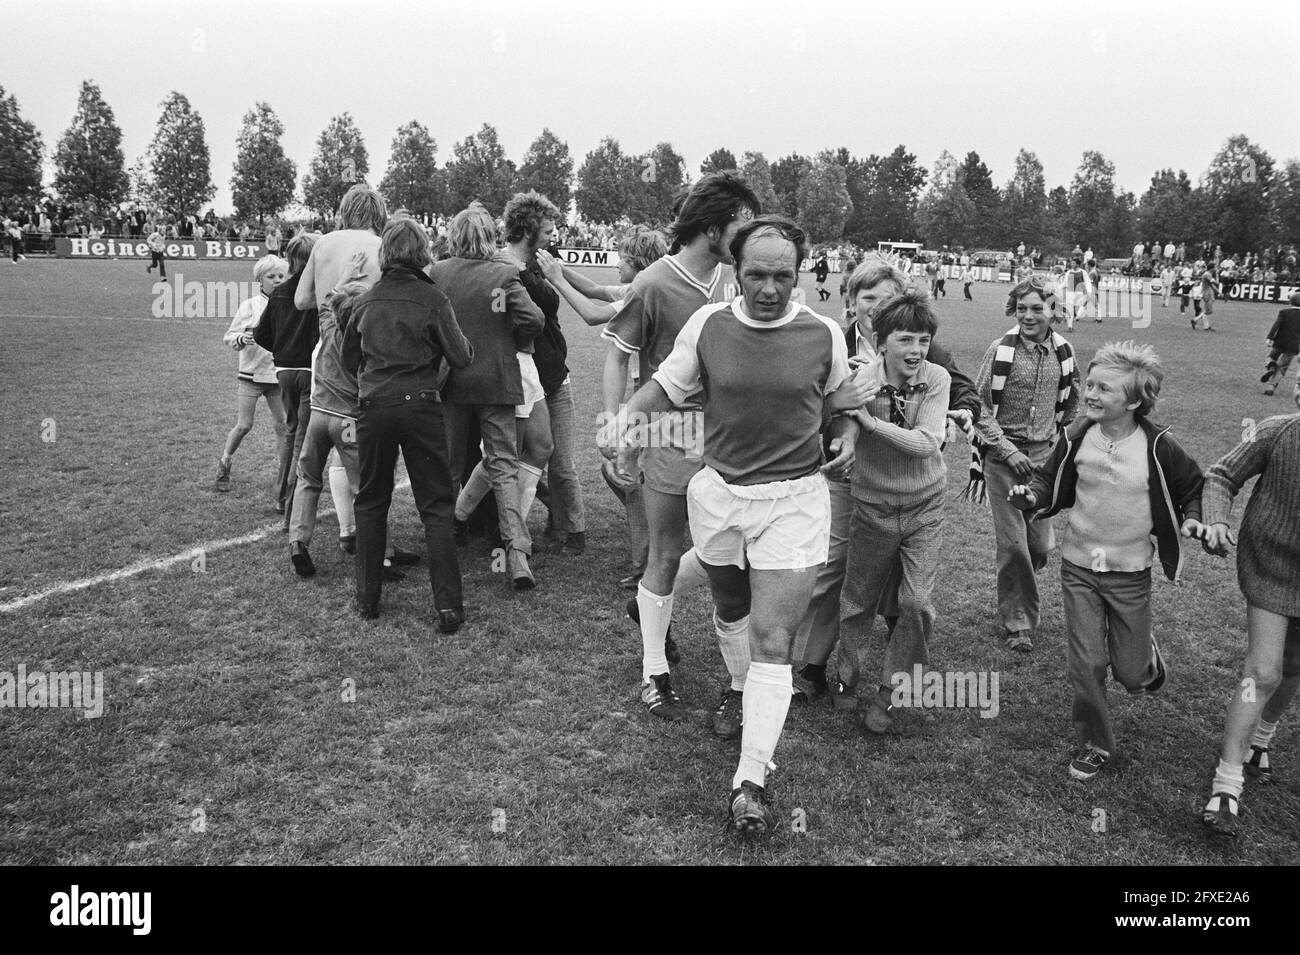 Supporters surround the players after the match; victory makes De Volewijckers champions of the second division, June 6, 1971, Champions, sports, supporters, soccer, footballers, The Netherlands, 20th century press agency photo, news to remember, documentary, historic photography 1945-1990, visual stories, human history of the Twentieth Century, capturing moments in time Stock Photo